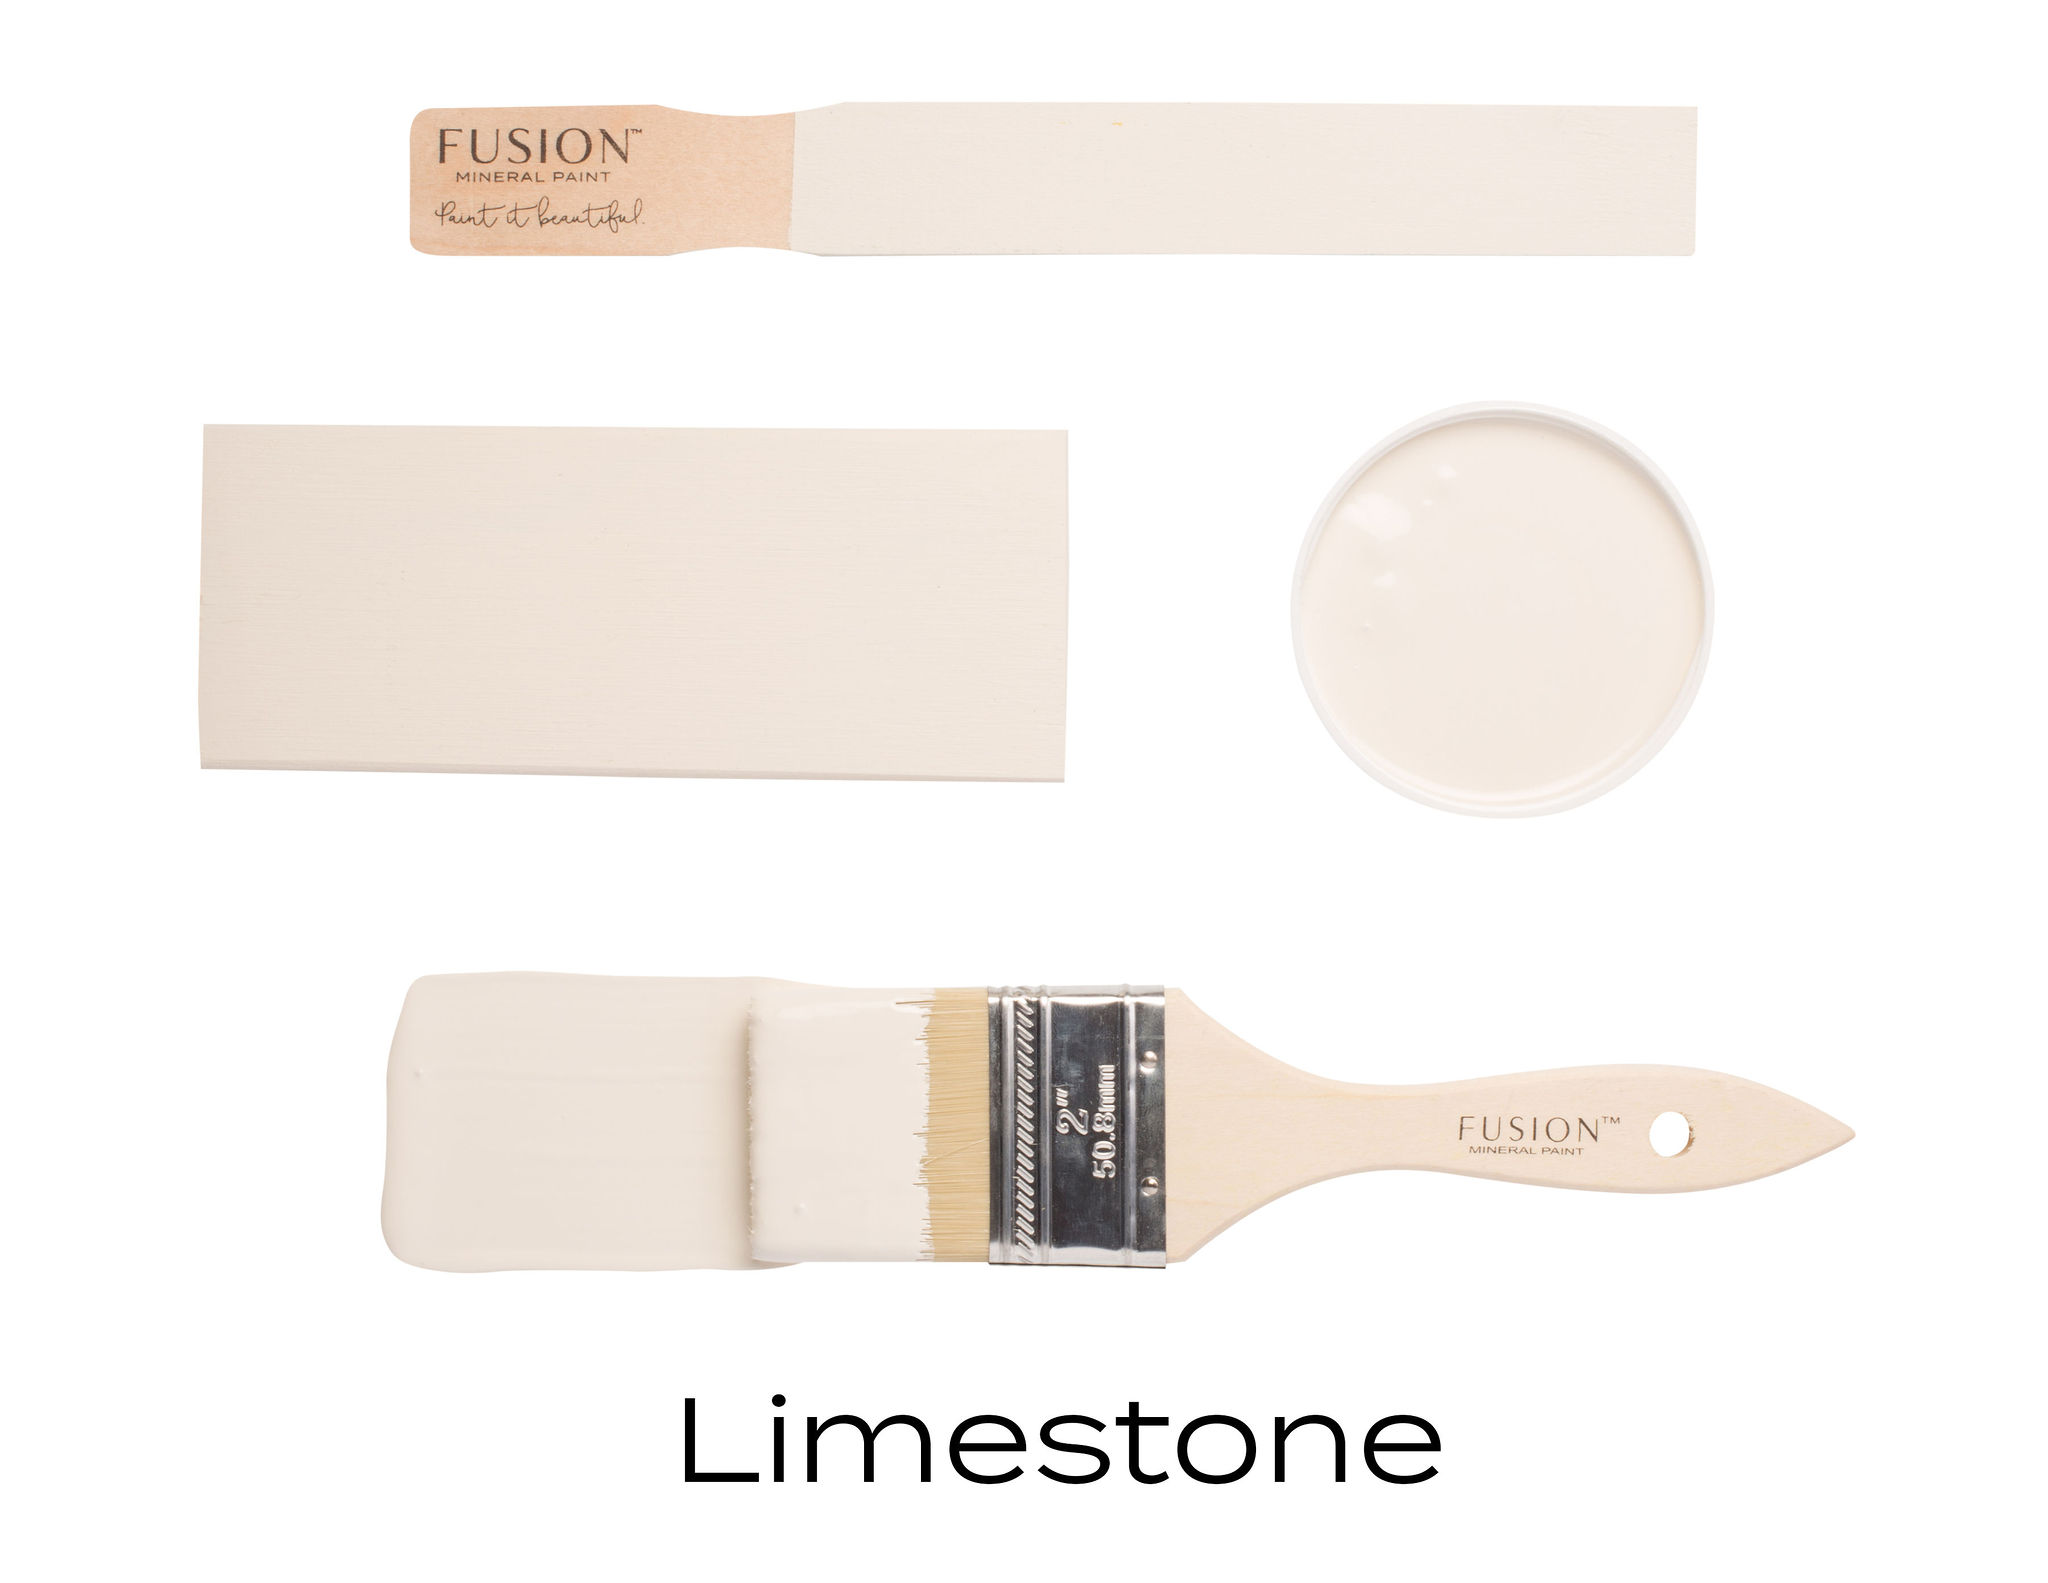 Limestone fusion mineral paint Goed Gestyled Brielle